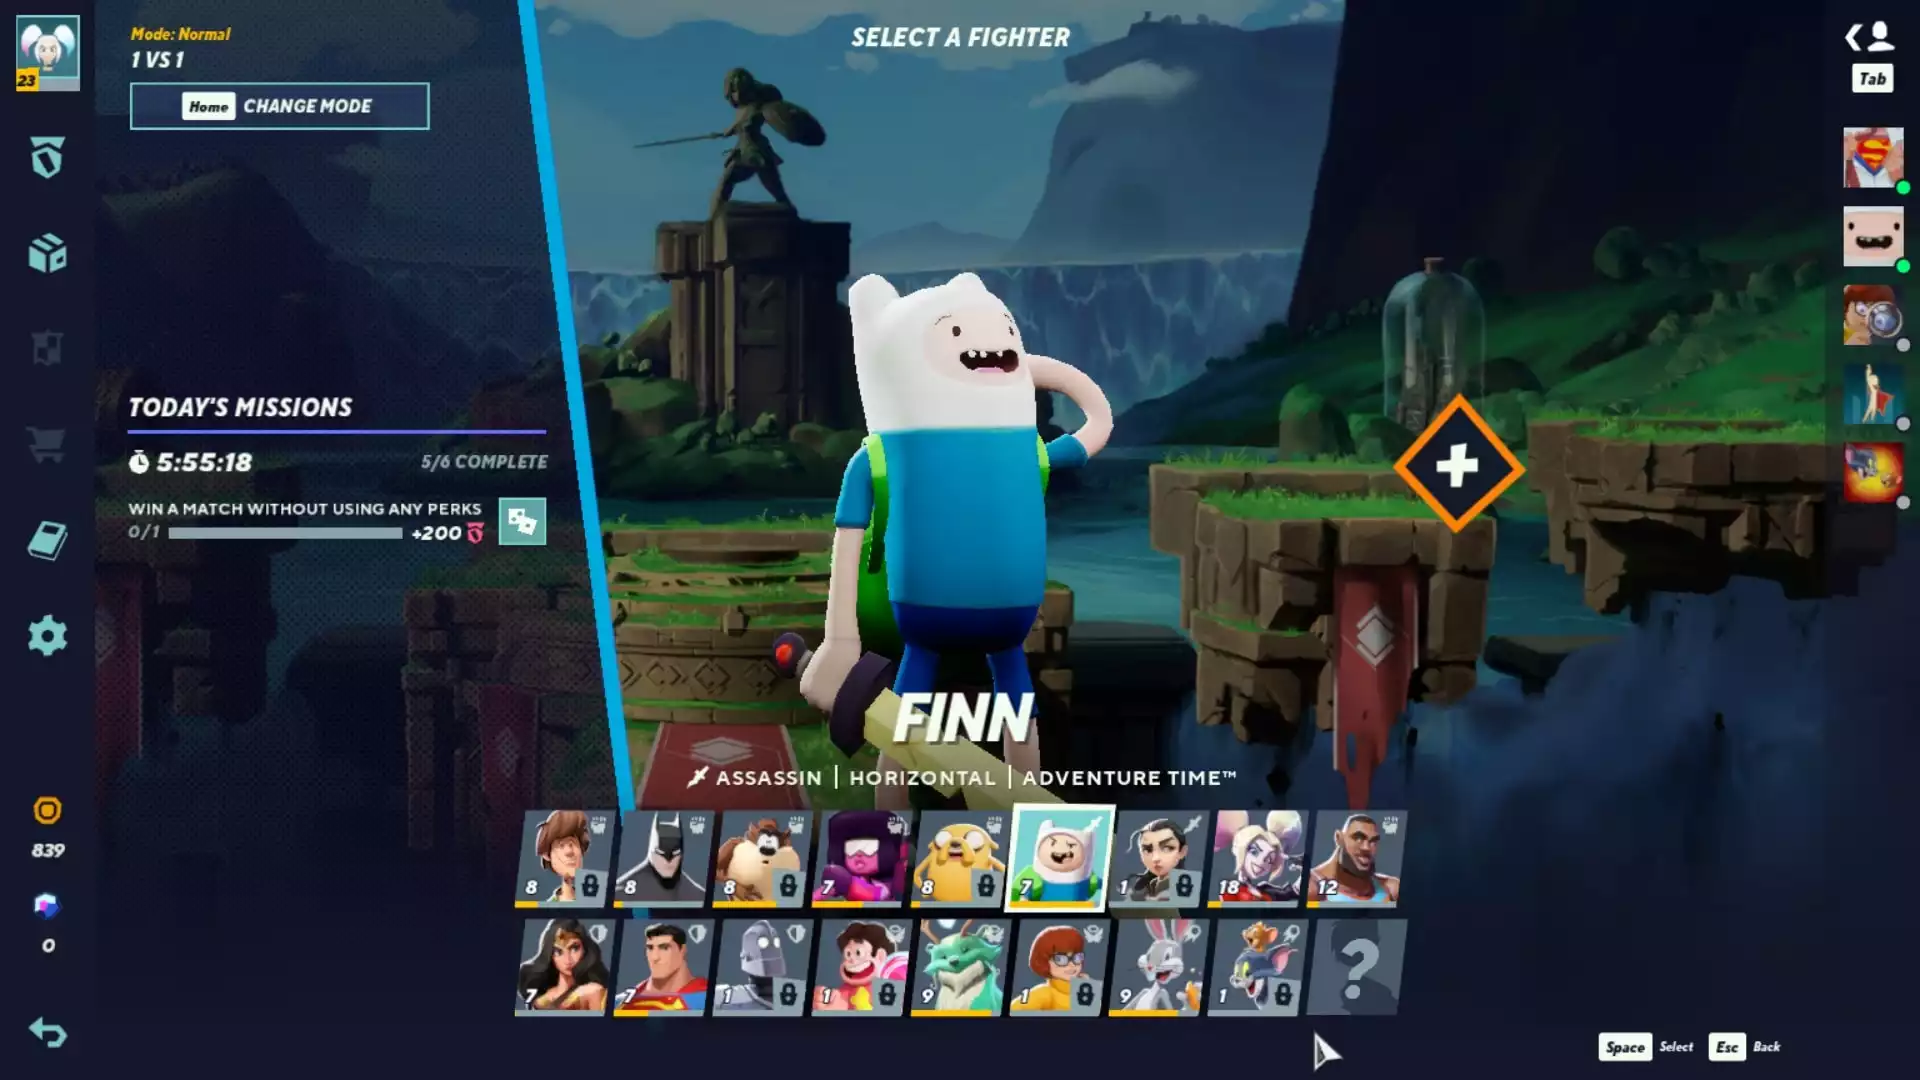 MultiVersus Finn Guide: Combos, Perks, Specials, And More